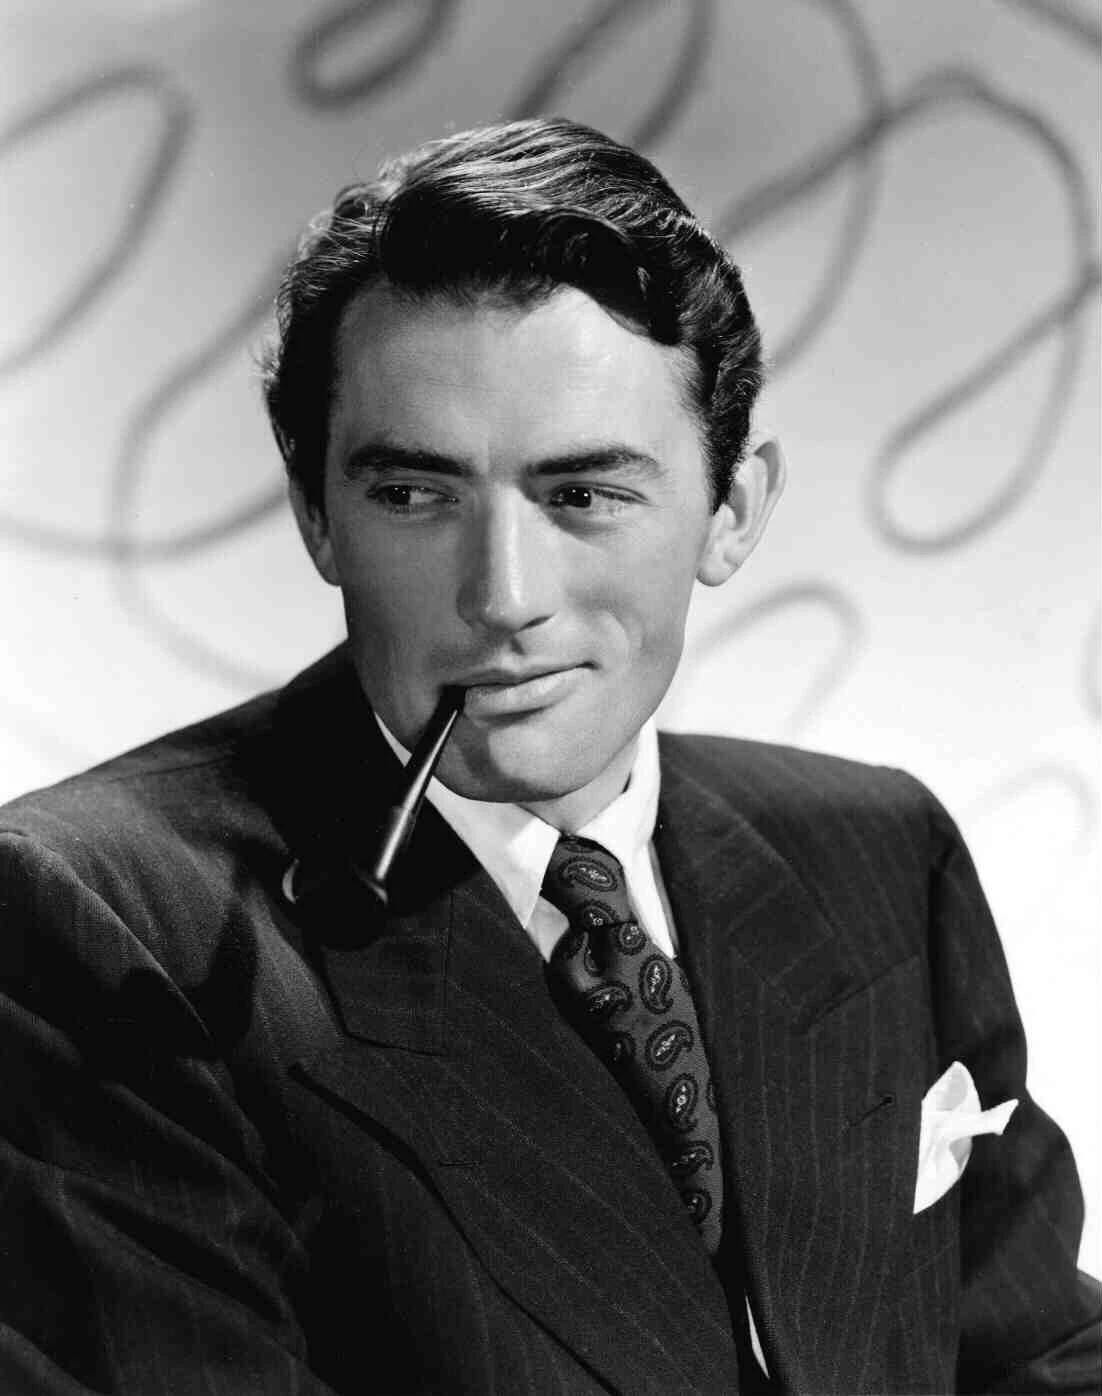 Publicity photo of Gregory Peck for MGM in 1945. Public domain via Wikimedia Commons